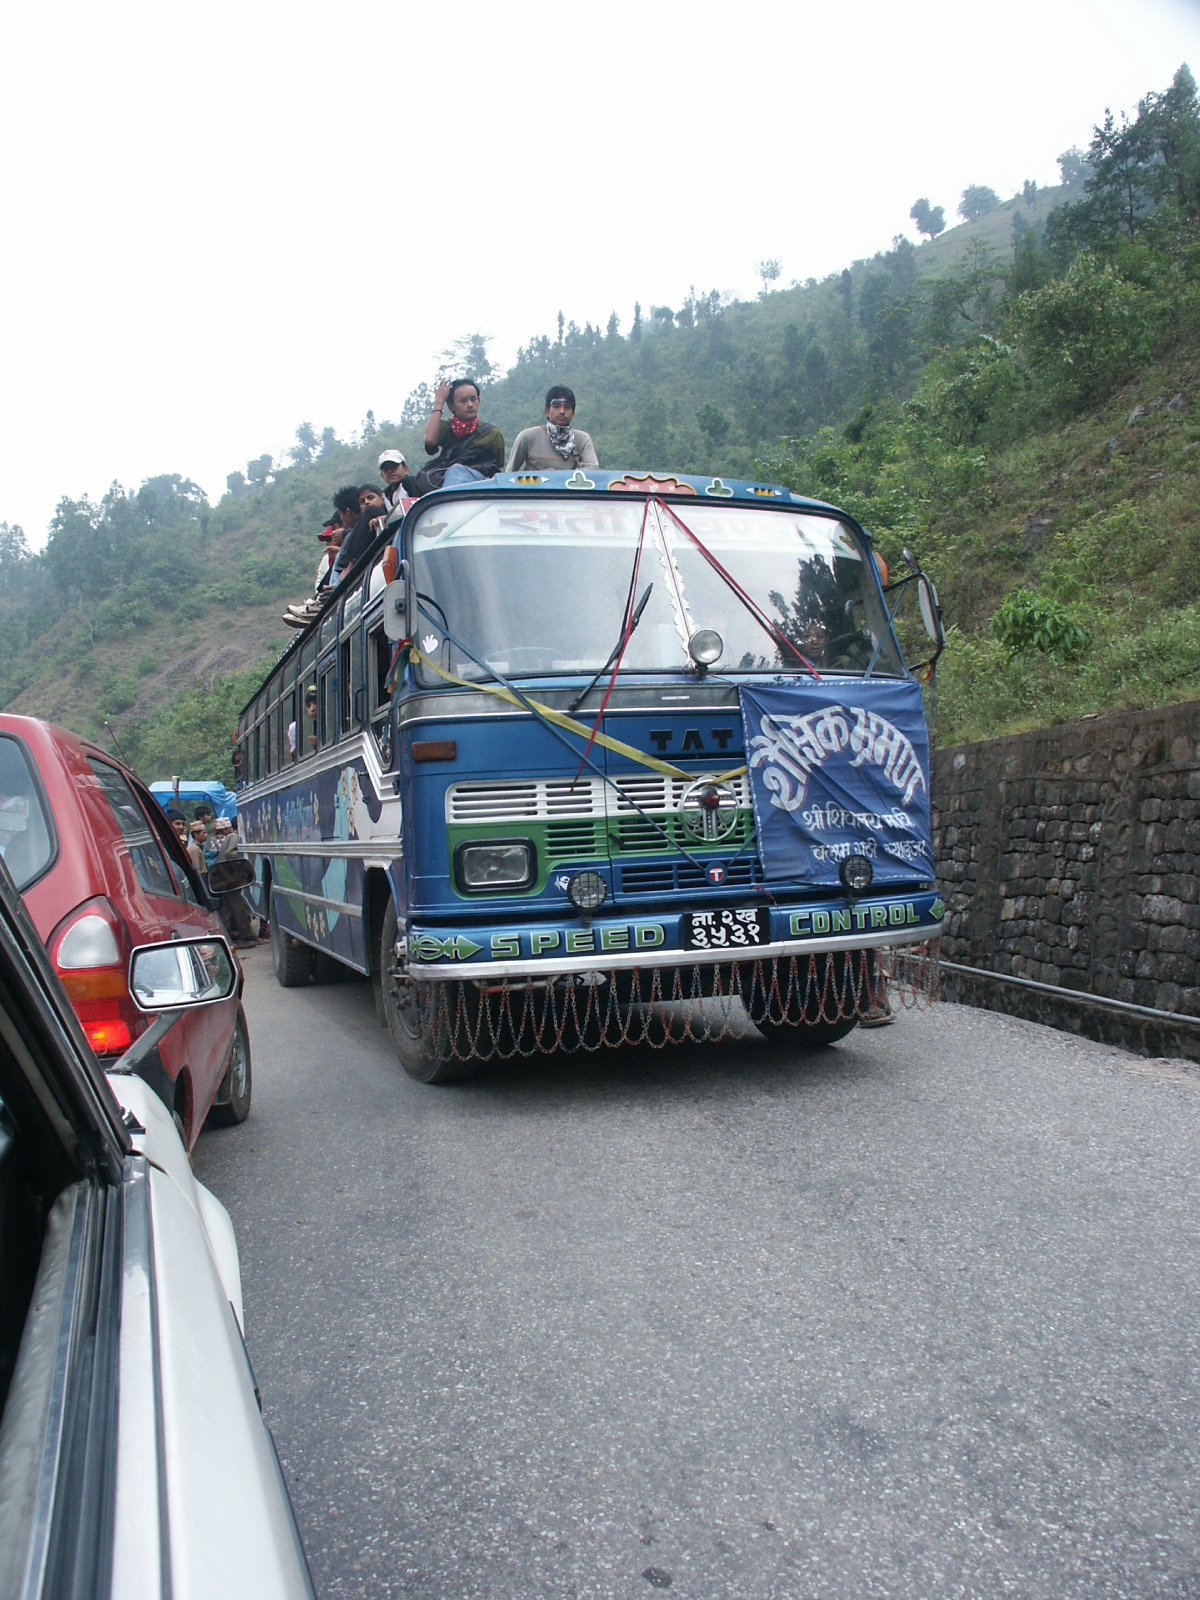 Albert took this photo on his earlier trip to Nepal, on the same "highway" to Pokhara: Surviving the Roads in Nepal